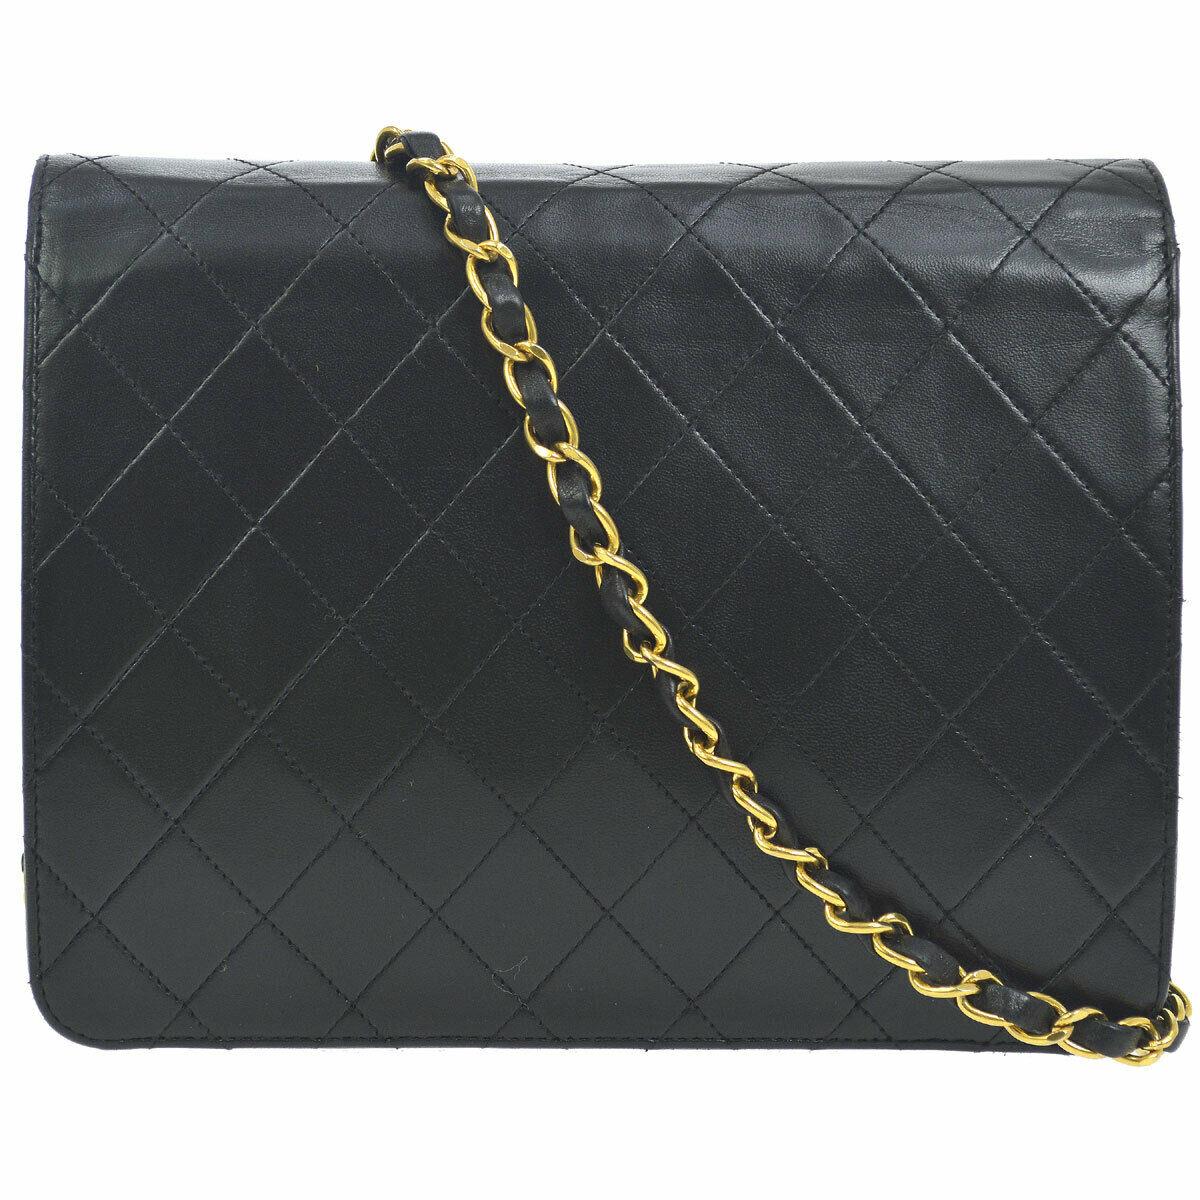 Chanel Classic Black Leather Lambskin Gold Chain Evening Shoulder Flap Bag

Lambskin leather
Gold tone hardware
Snap button closure
Leather lining
Date code present
Made in France
Shoulder strap drop 16